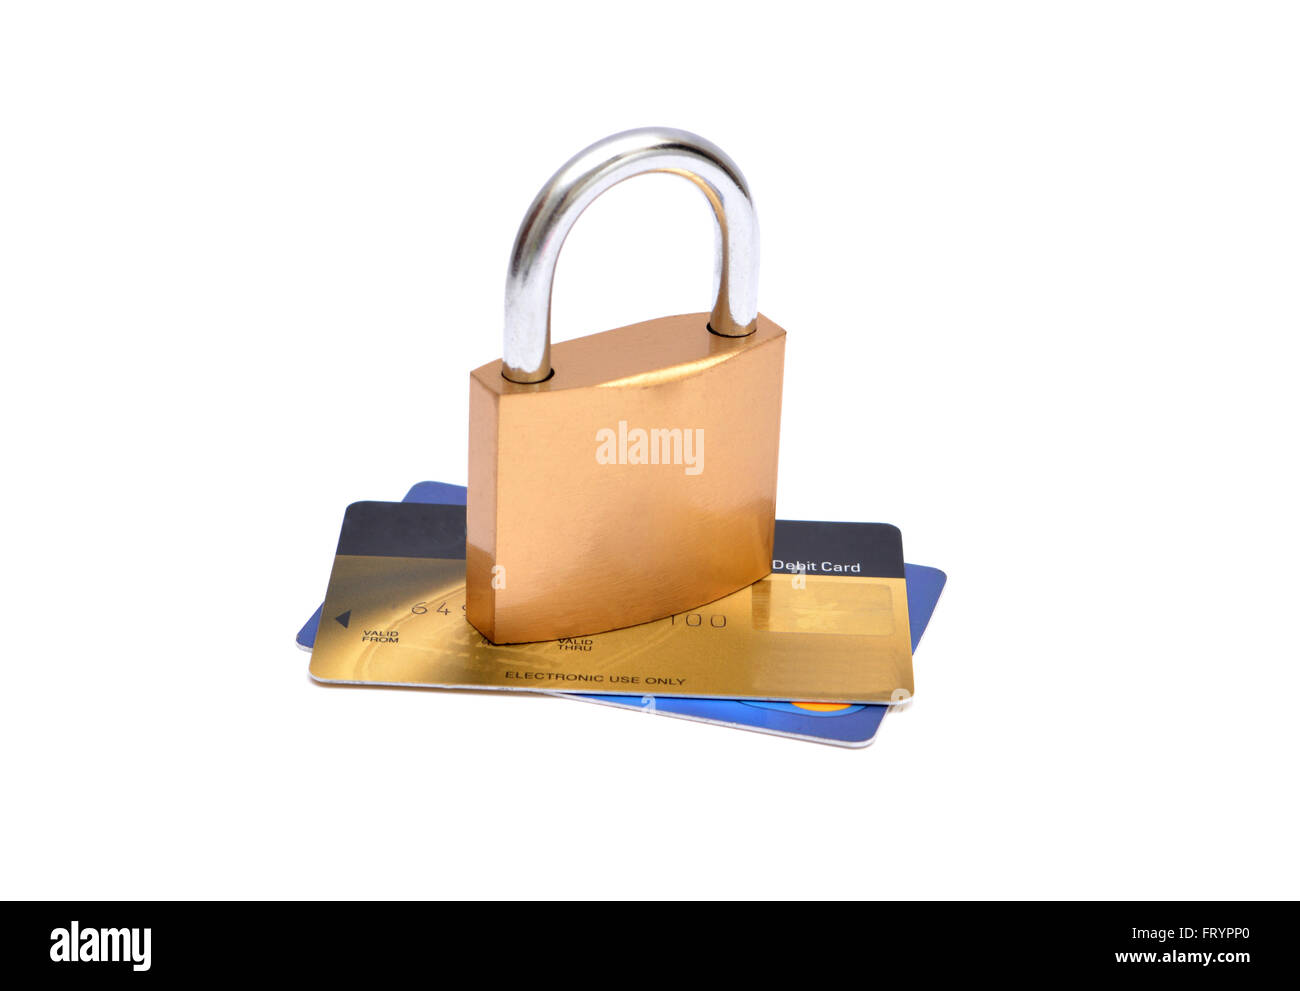 Safety Lock on set of credit debit cards. Stock Photo